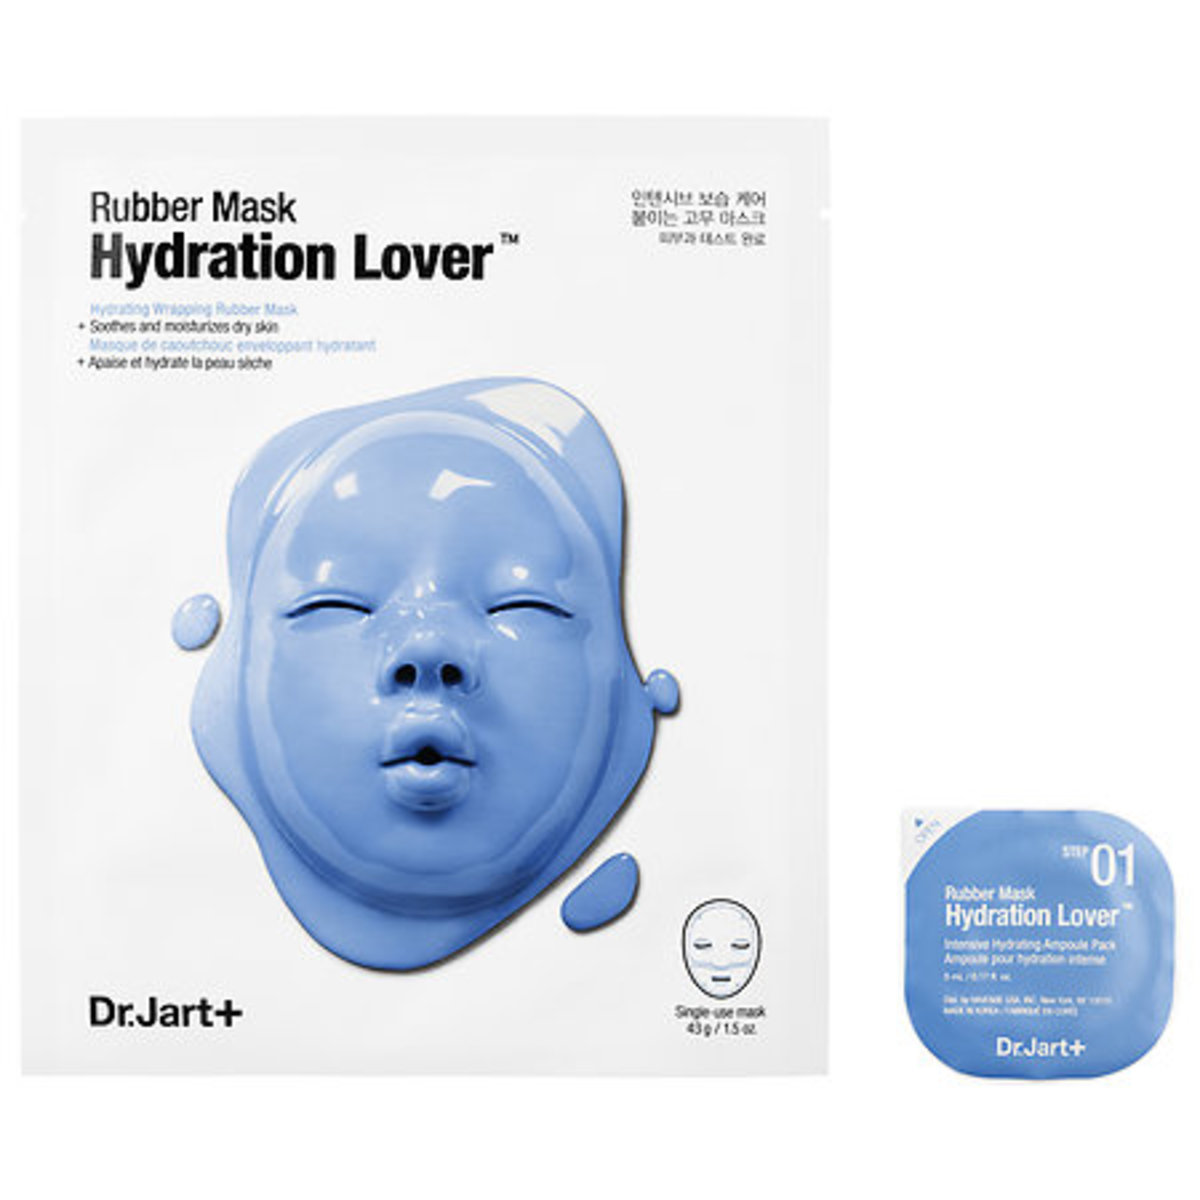 Dr. Jart Hydration Lover Rubber Mask, $12, available at Sephora.